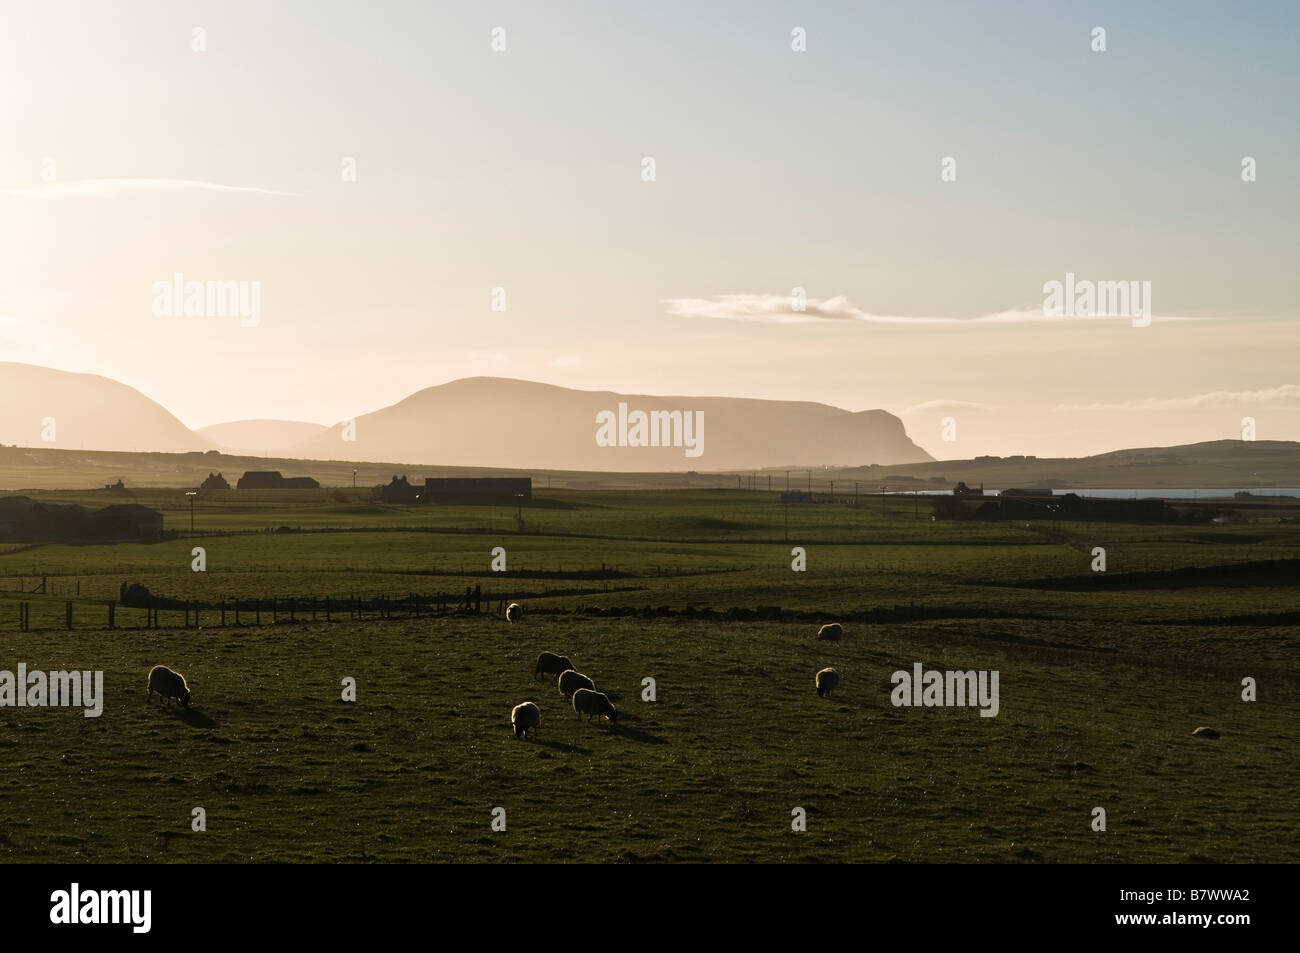 dh  STENNESS ORKNEY Flock of sheep grazing in field and hoy hills farmland fields animals Stock Photo